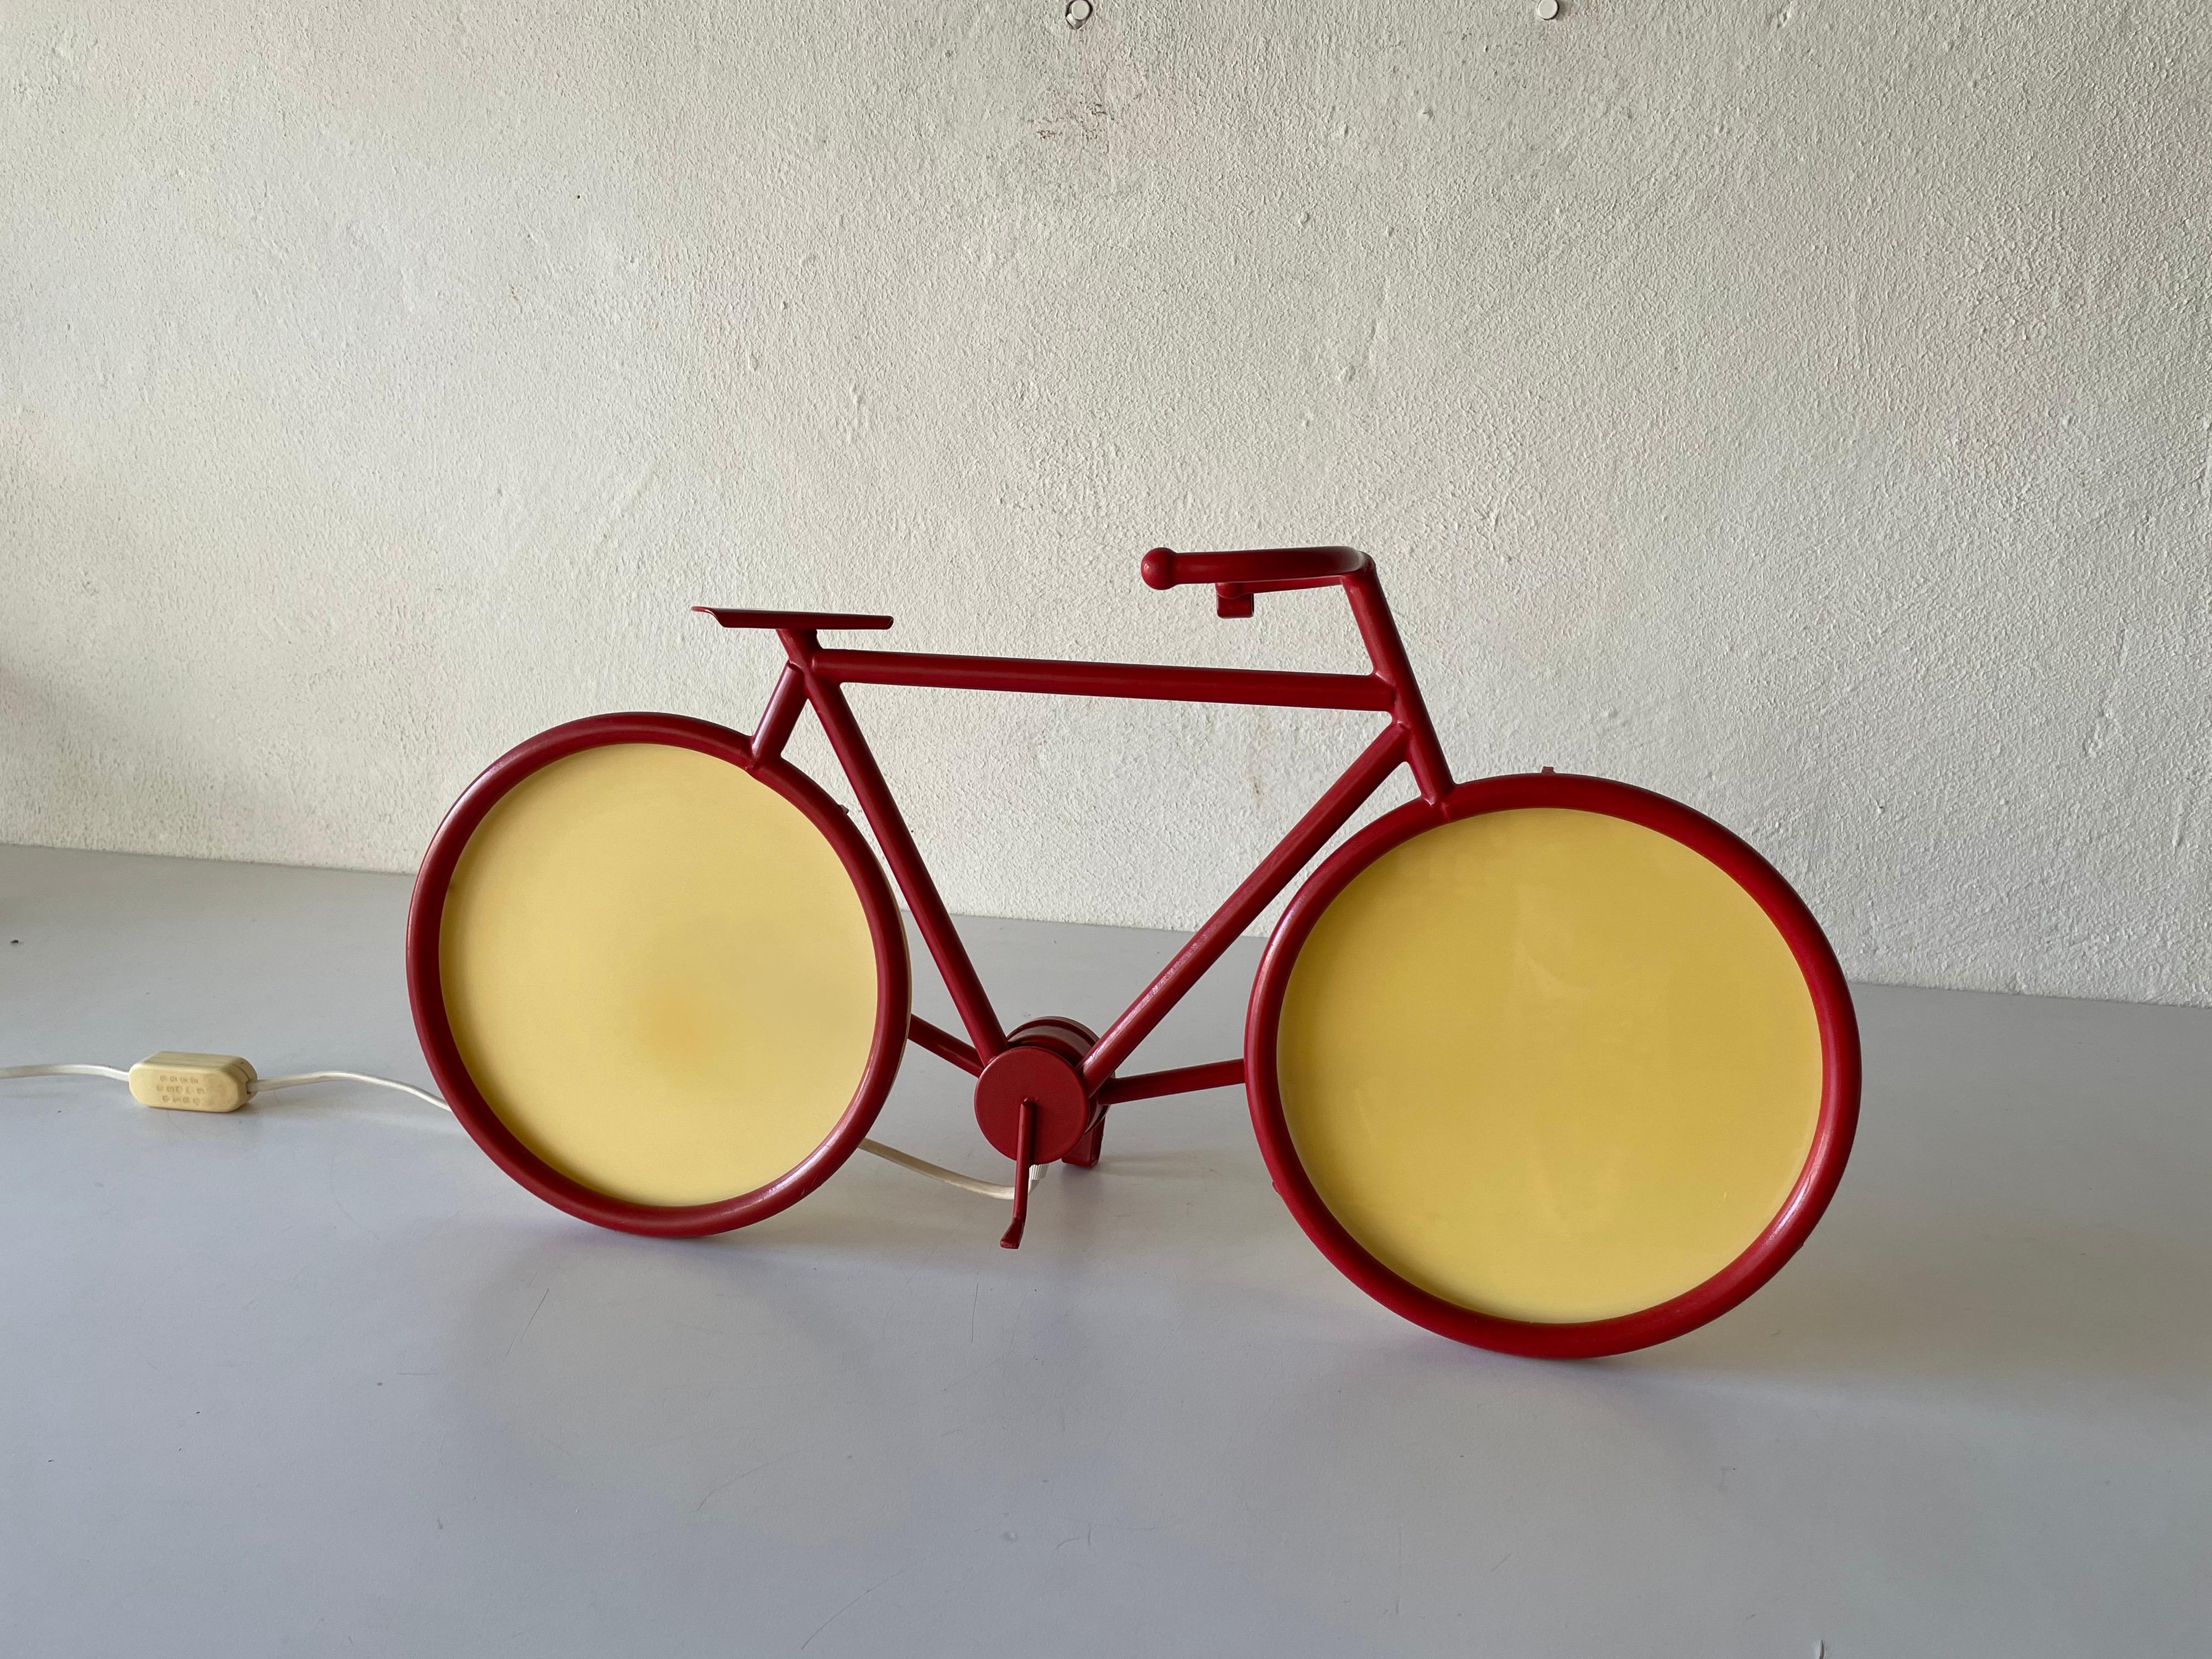 Red metal bicycle table lamp or wall lamp by Zicoli, 1970s Italy

Very rare large desk lampor wall lighting
Plastic rims.
Very high quality.
Fully functional.

Original cable and plug. This lamp is suitable for EU plug socket. Switch on-off